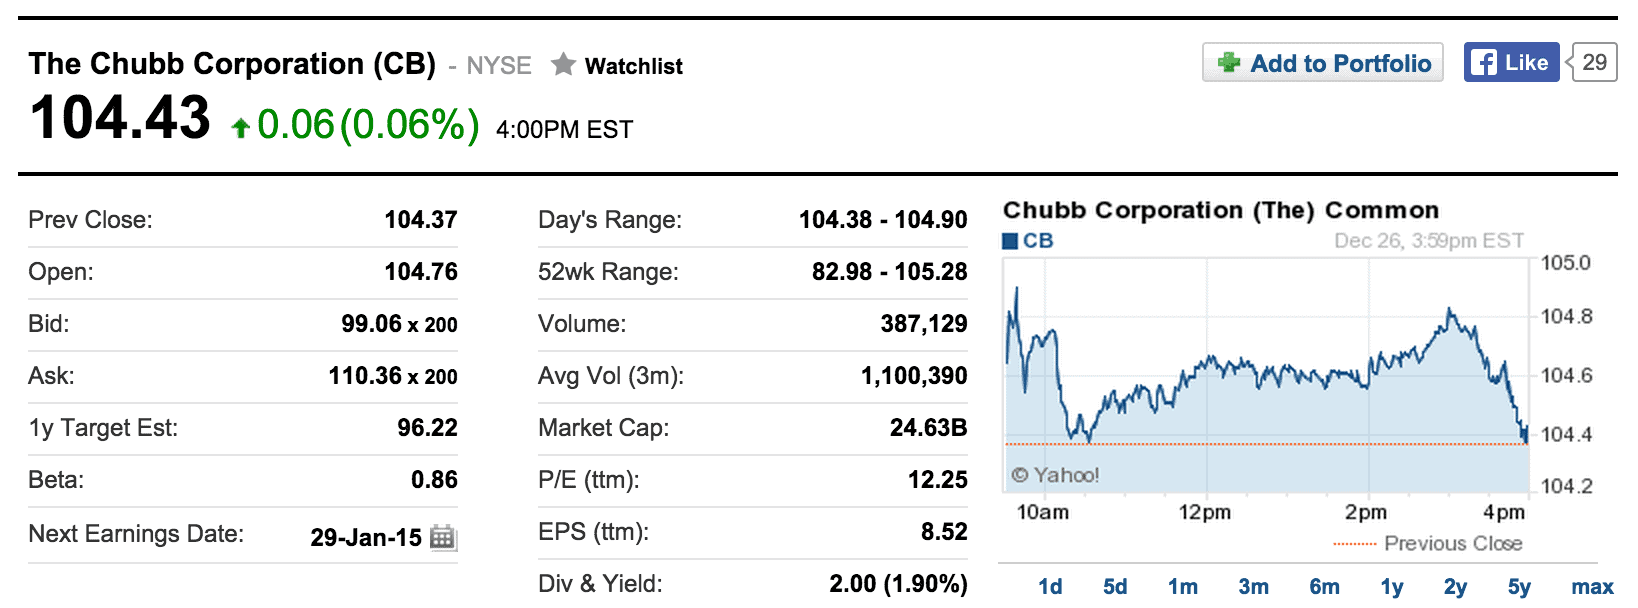 Stock Pick of the Week: The Chubb Corporation (CB)